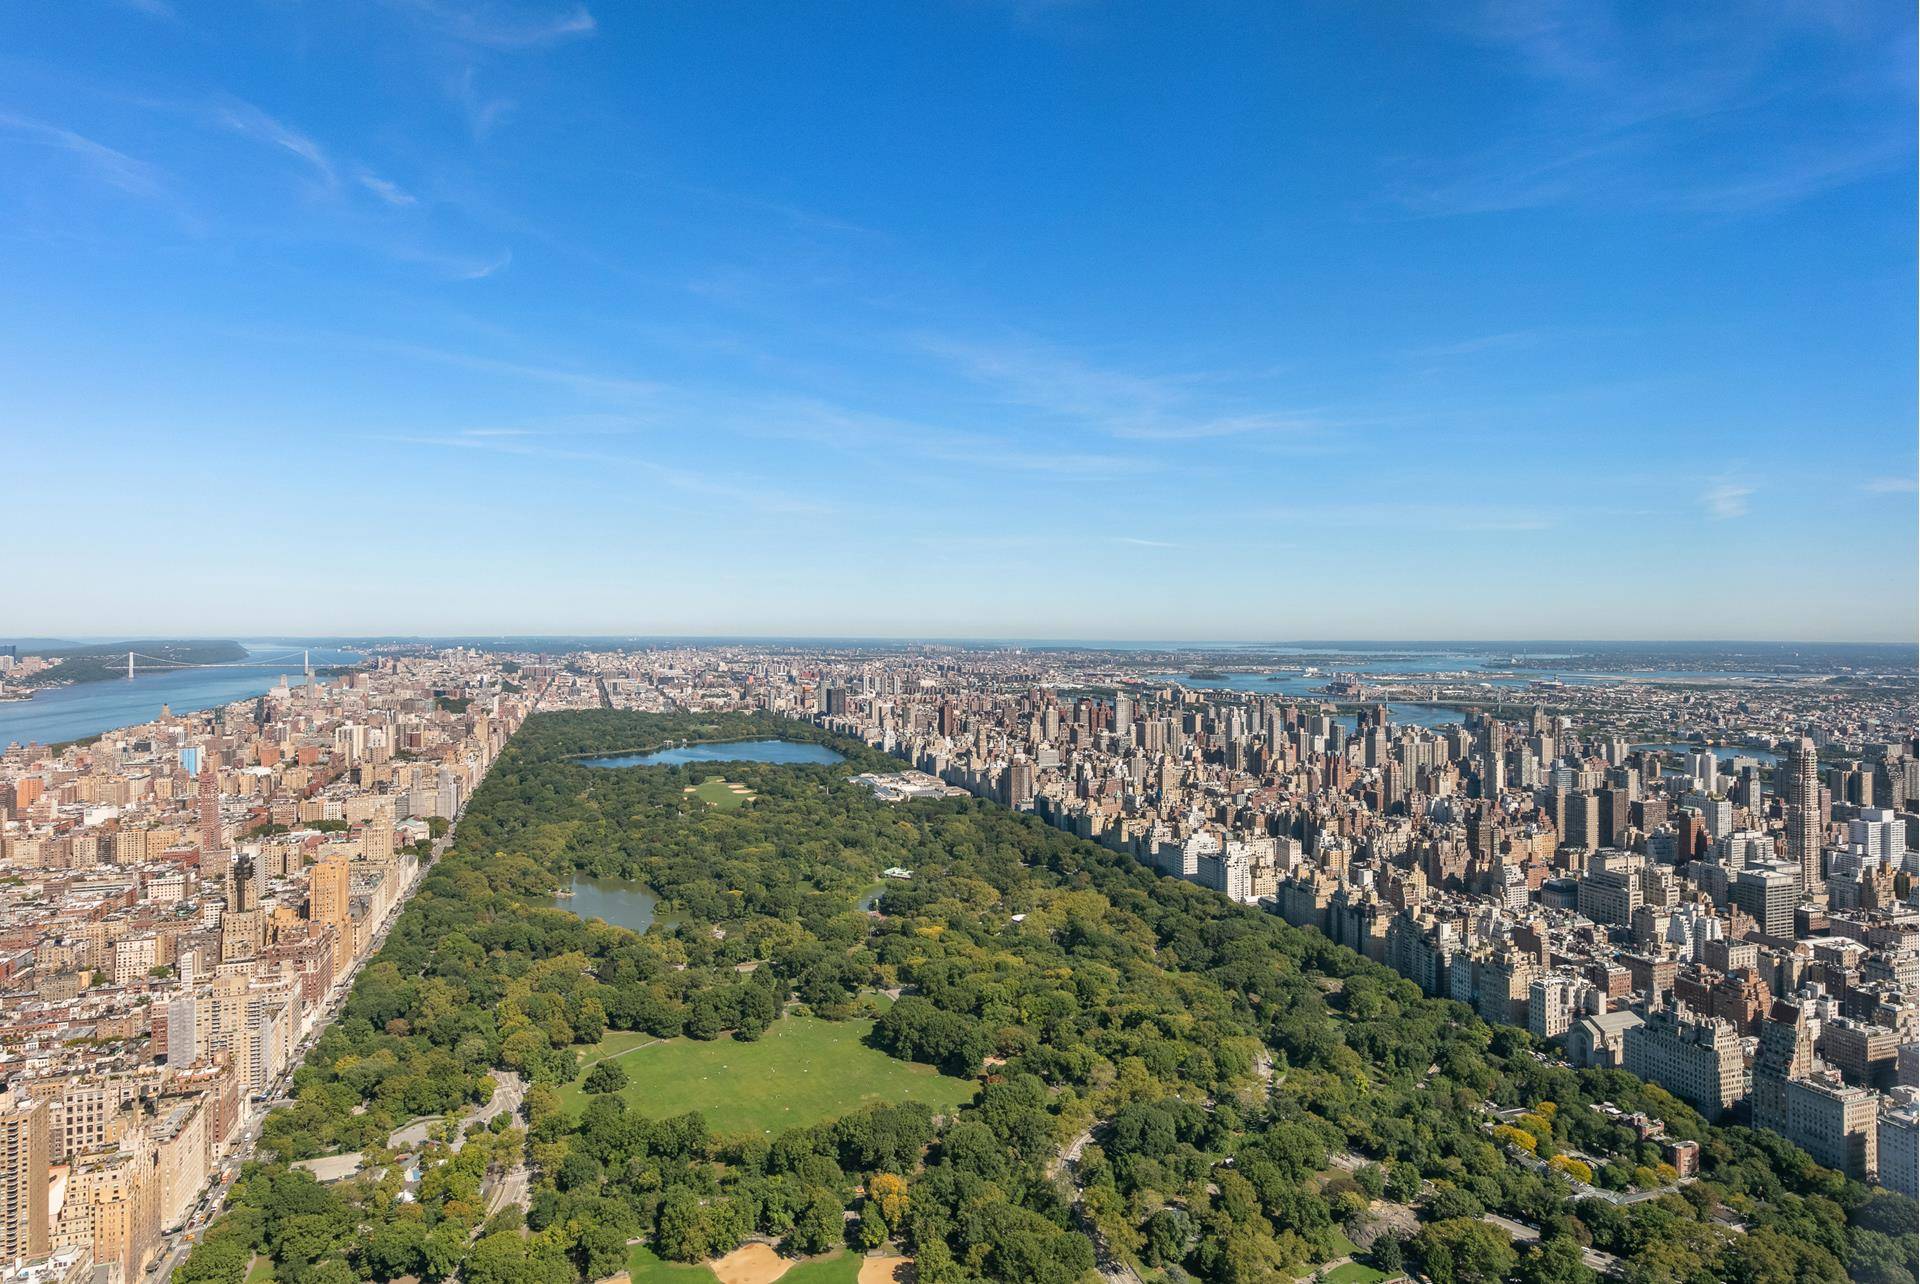 Perched 1, 000 feet above New York City, this stunning 4 bedroom, 4.